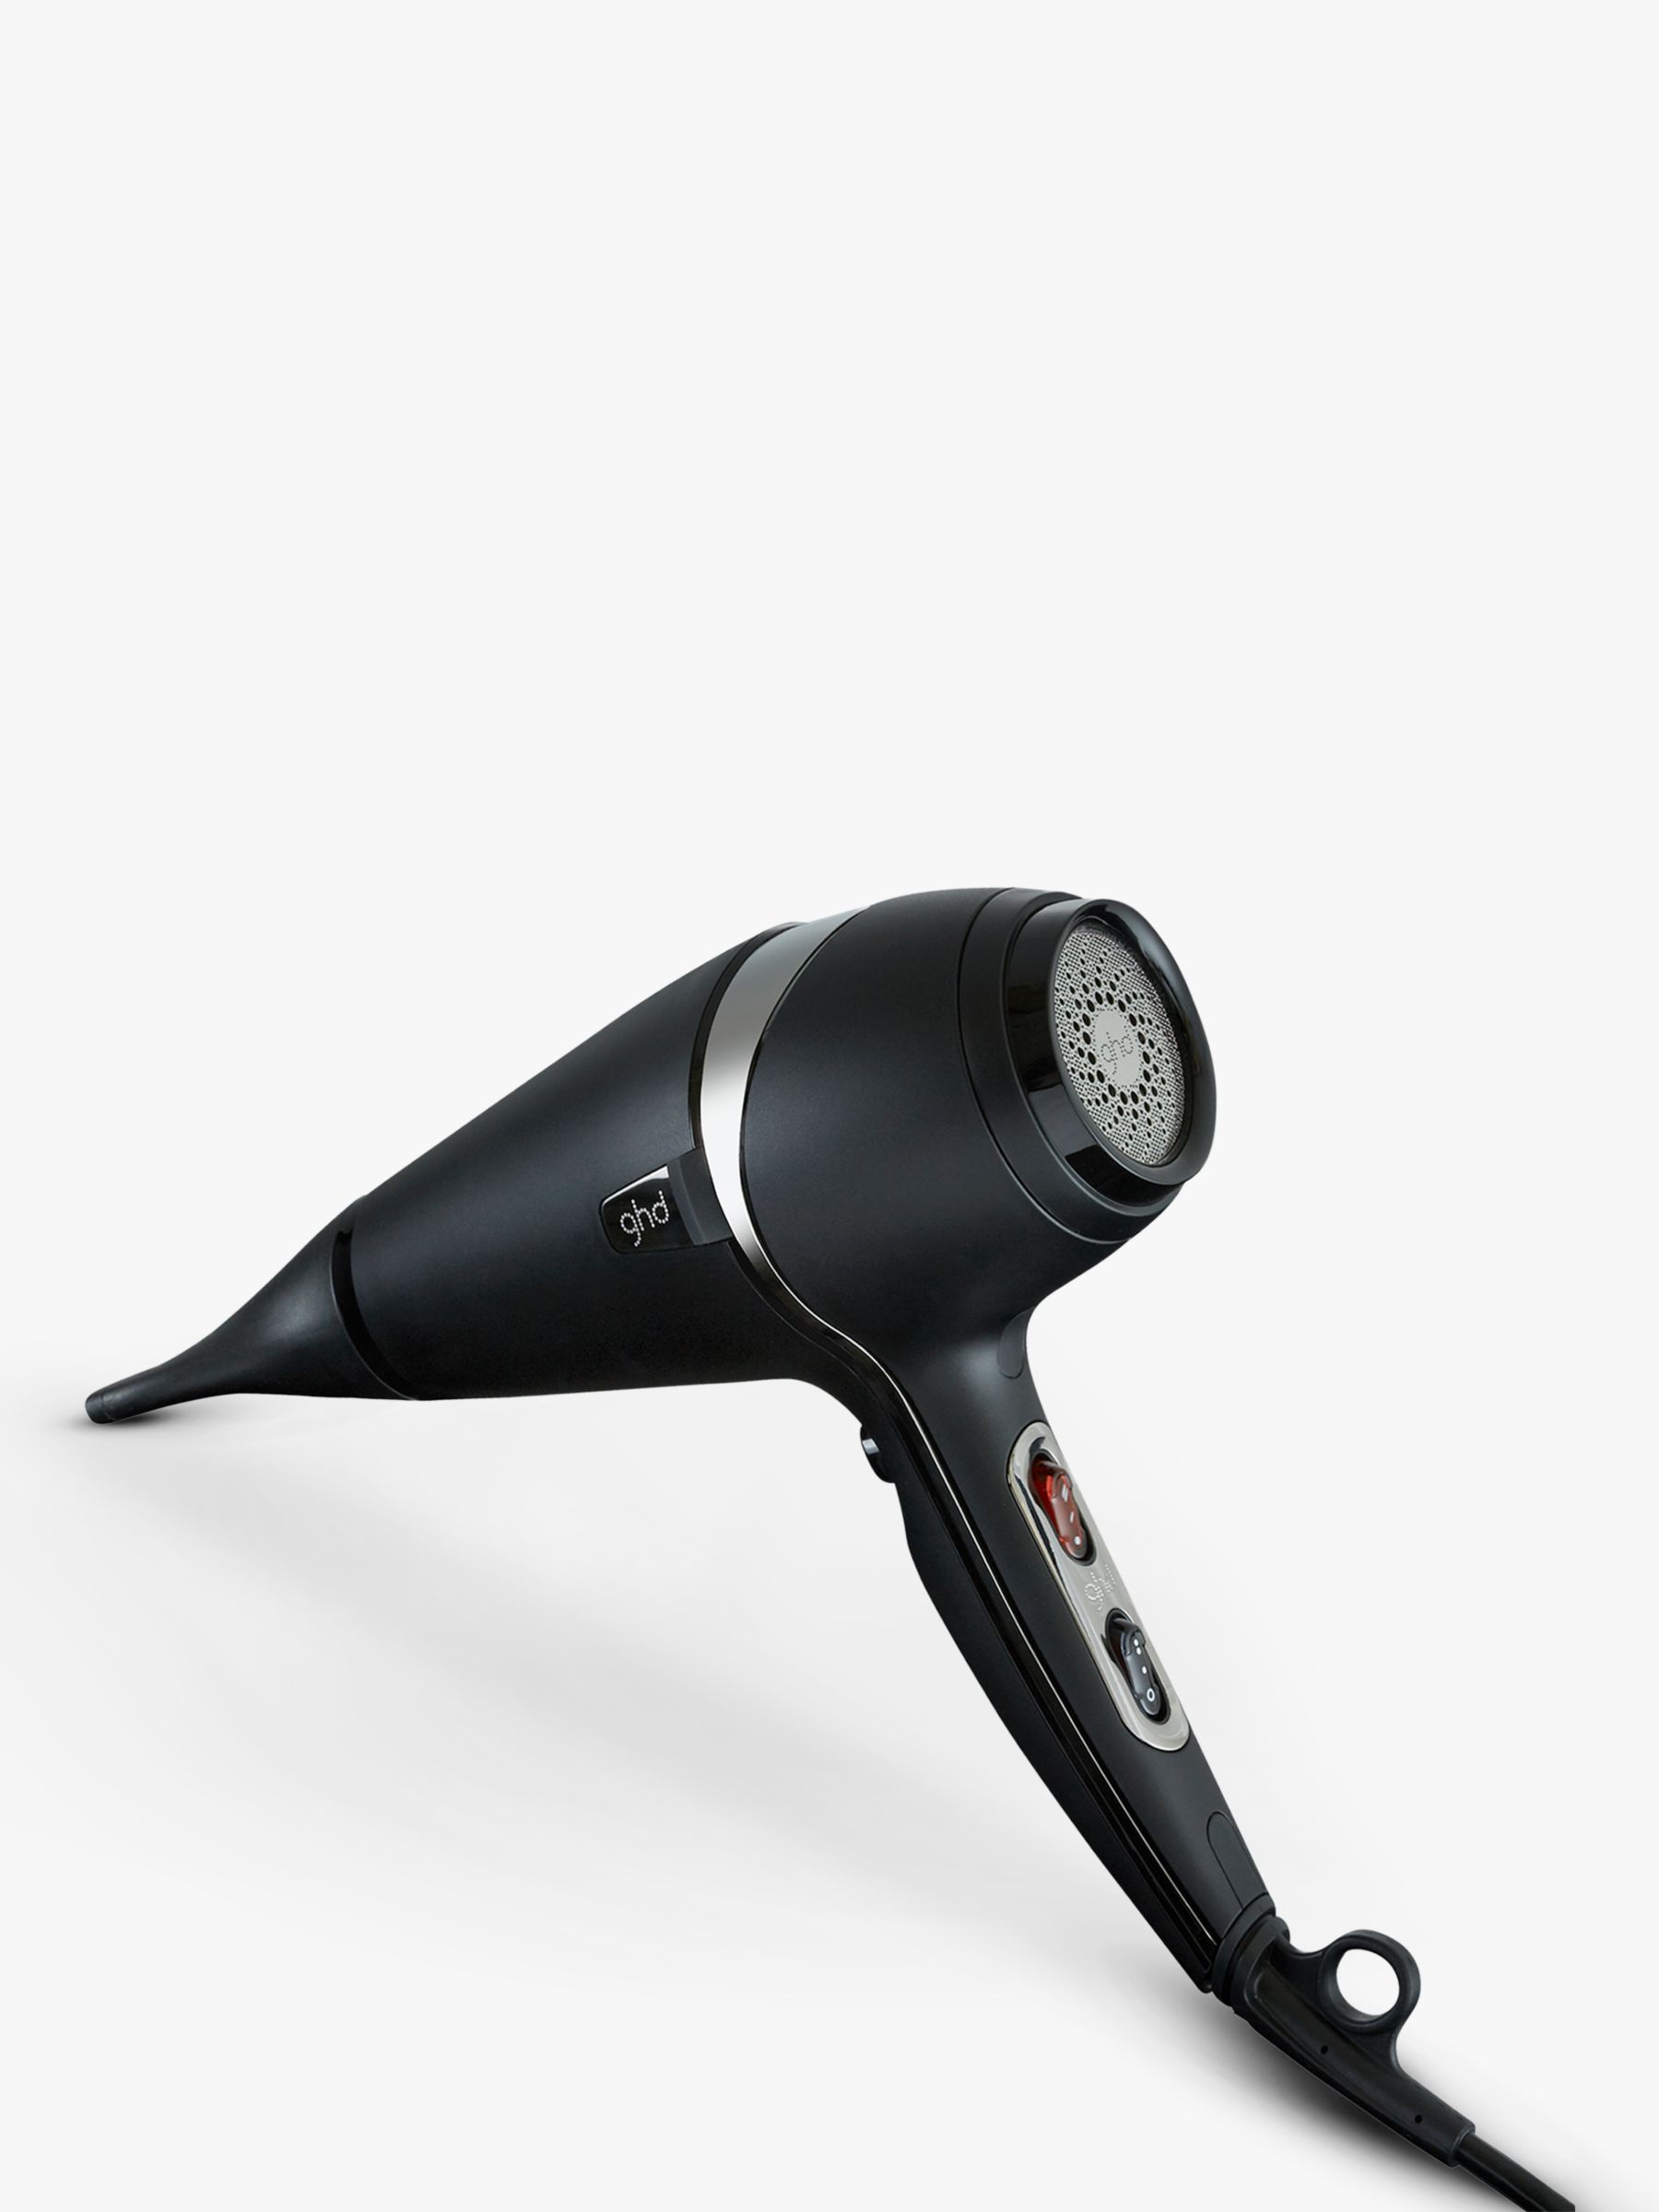 hair dryers for men: 6 Best-selling Hair Dryers for Men to upgrade your hair  styling - The Economic Times